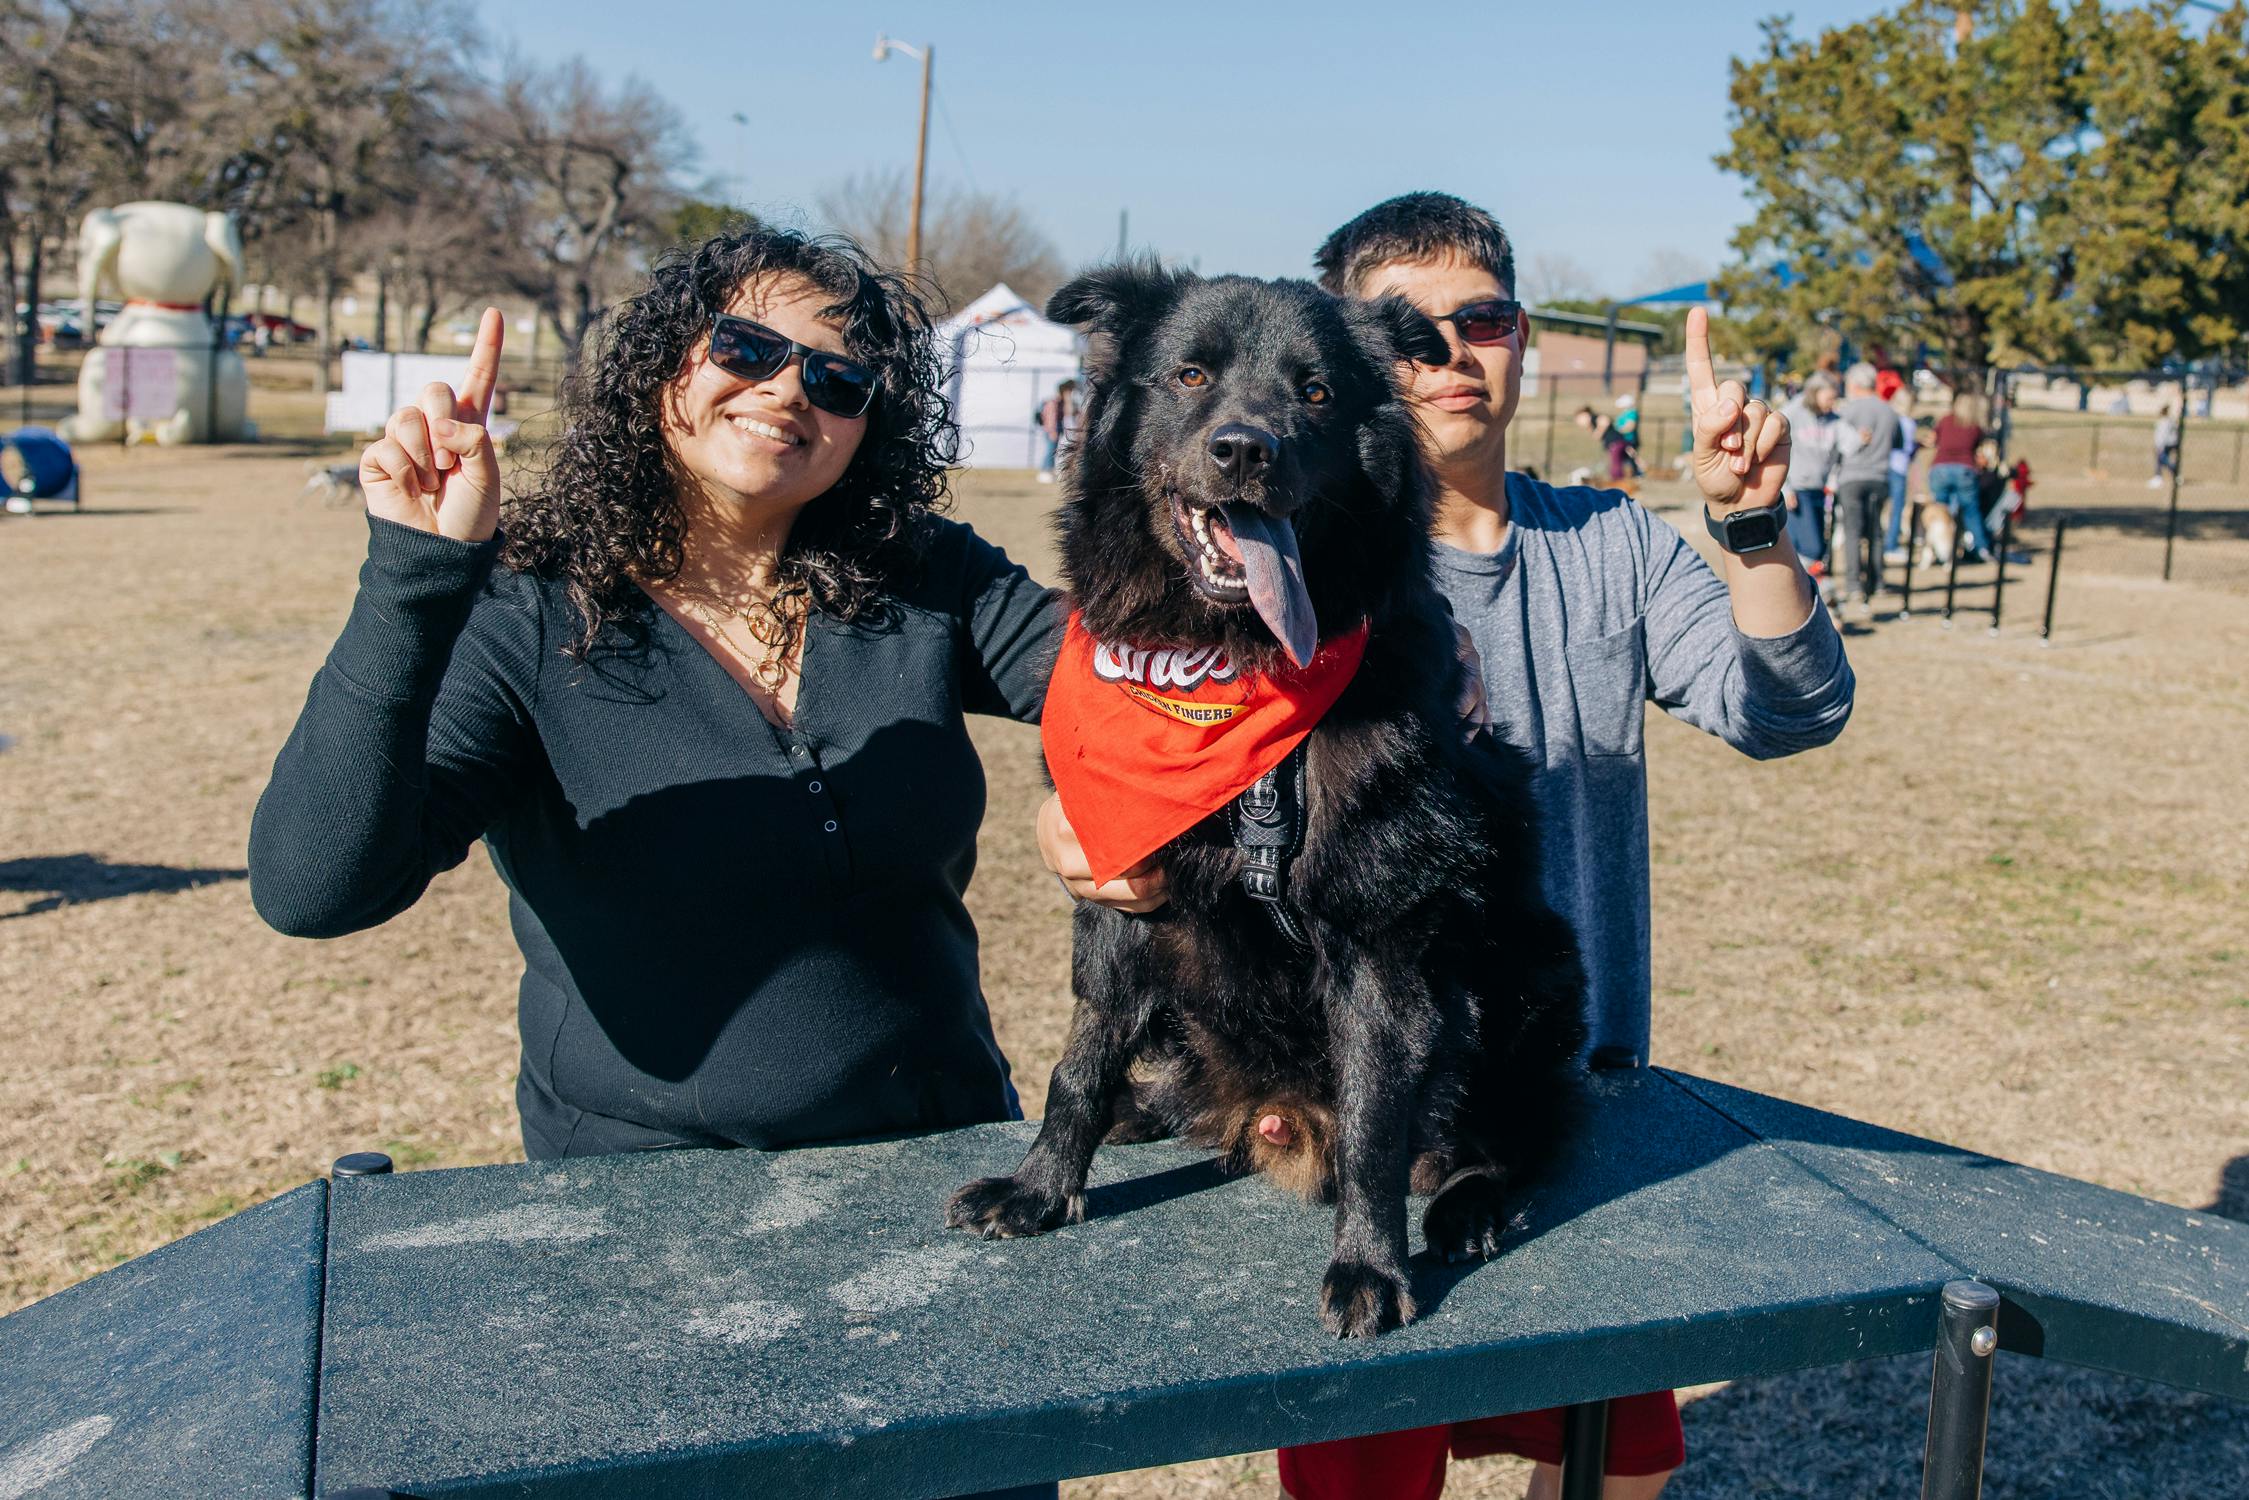 Owners and their dogs enjoying the grand opening of the Raising Cane's Dog Park